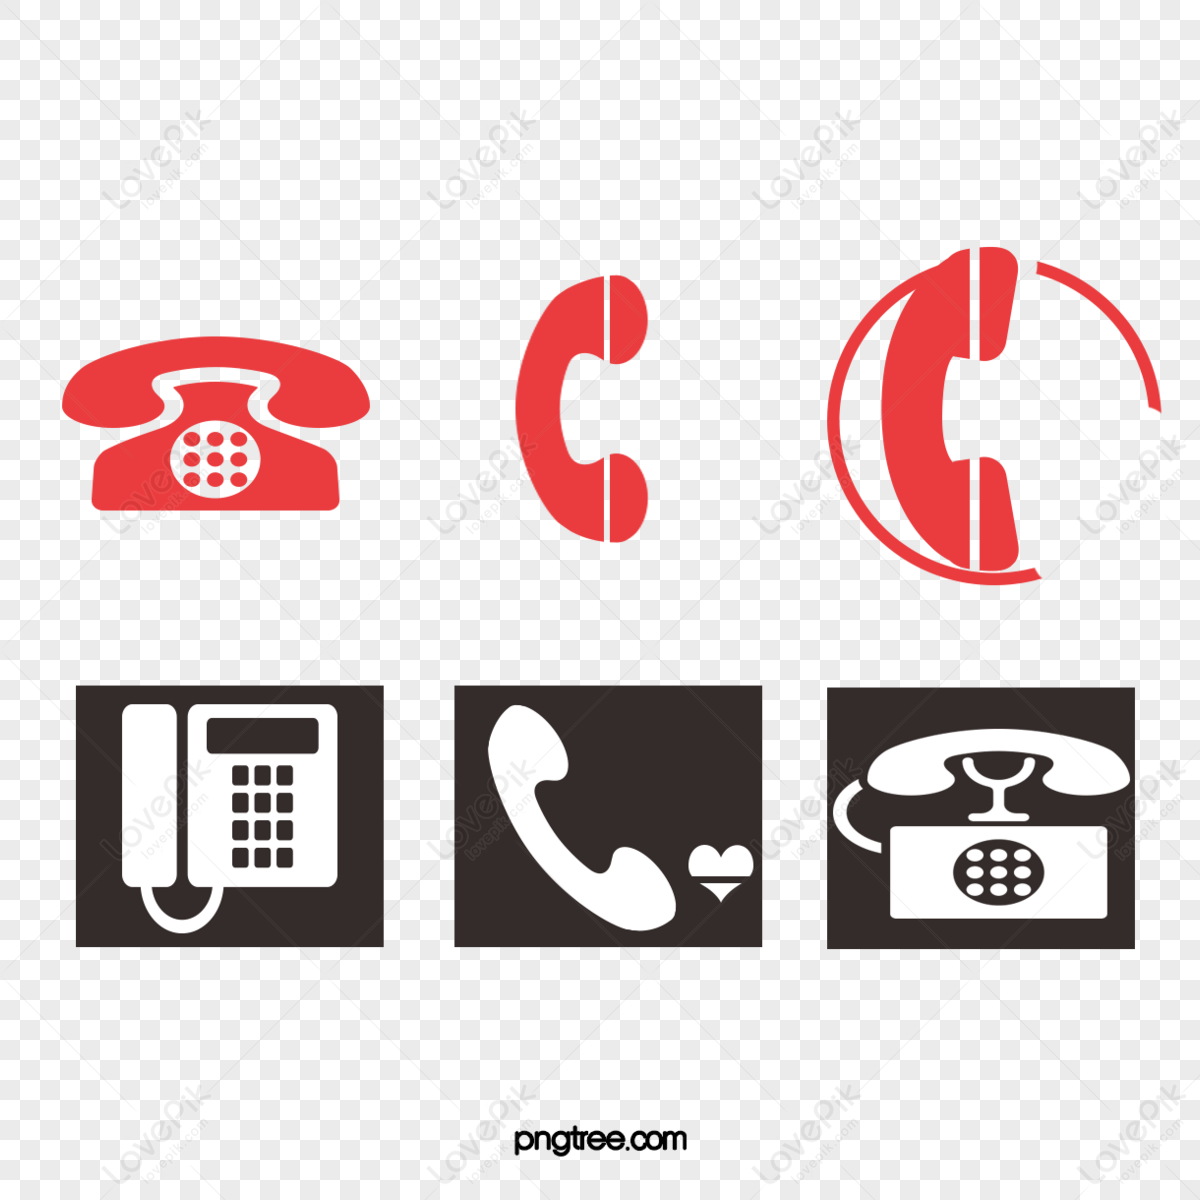 Phone icon vector male user person profile avatar symbol for contact -  Stock Image - Everypixel, avatar icon vector